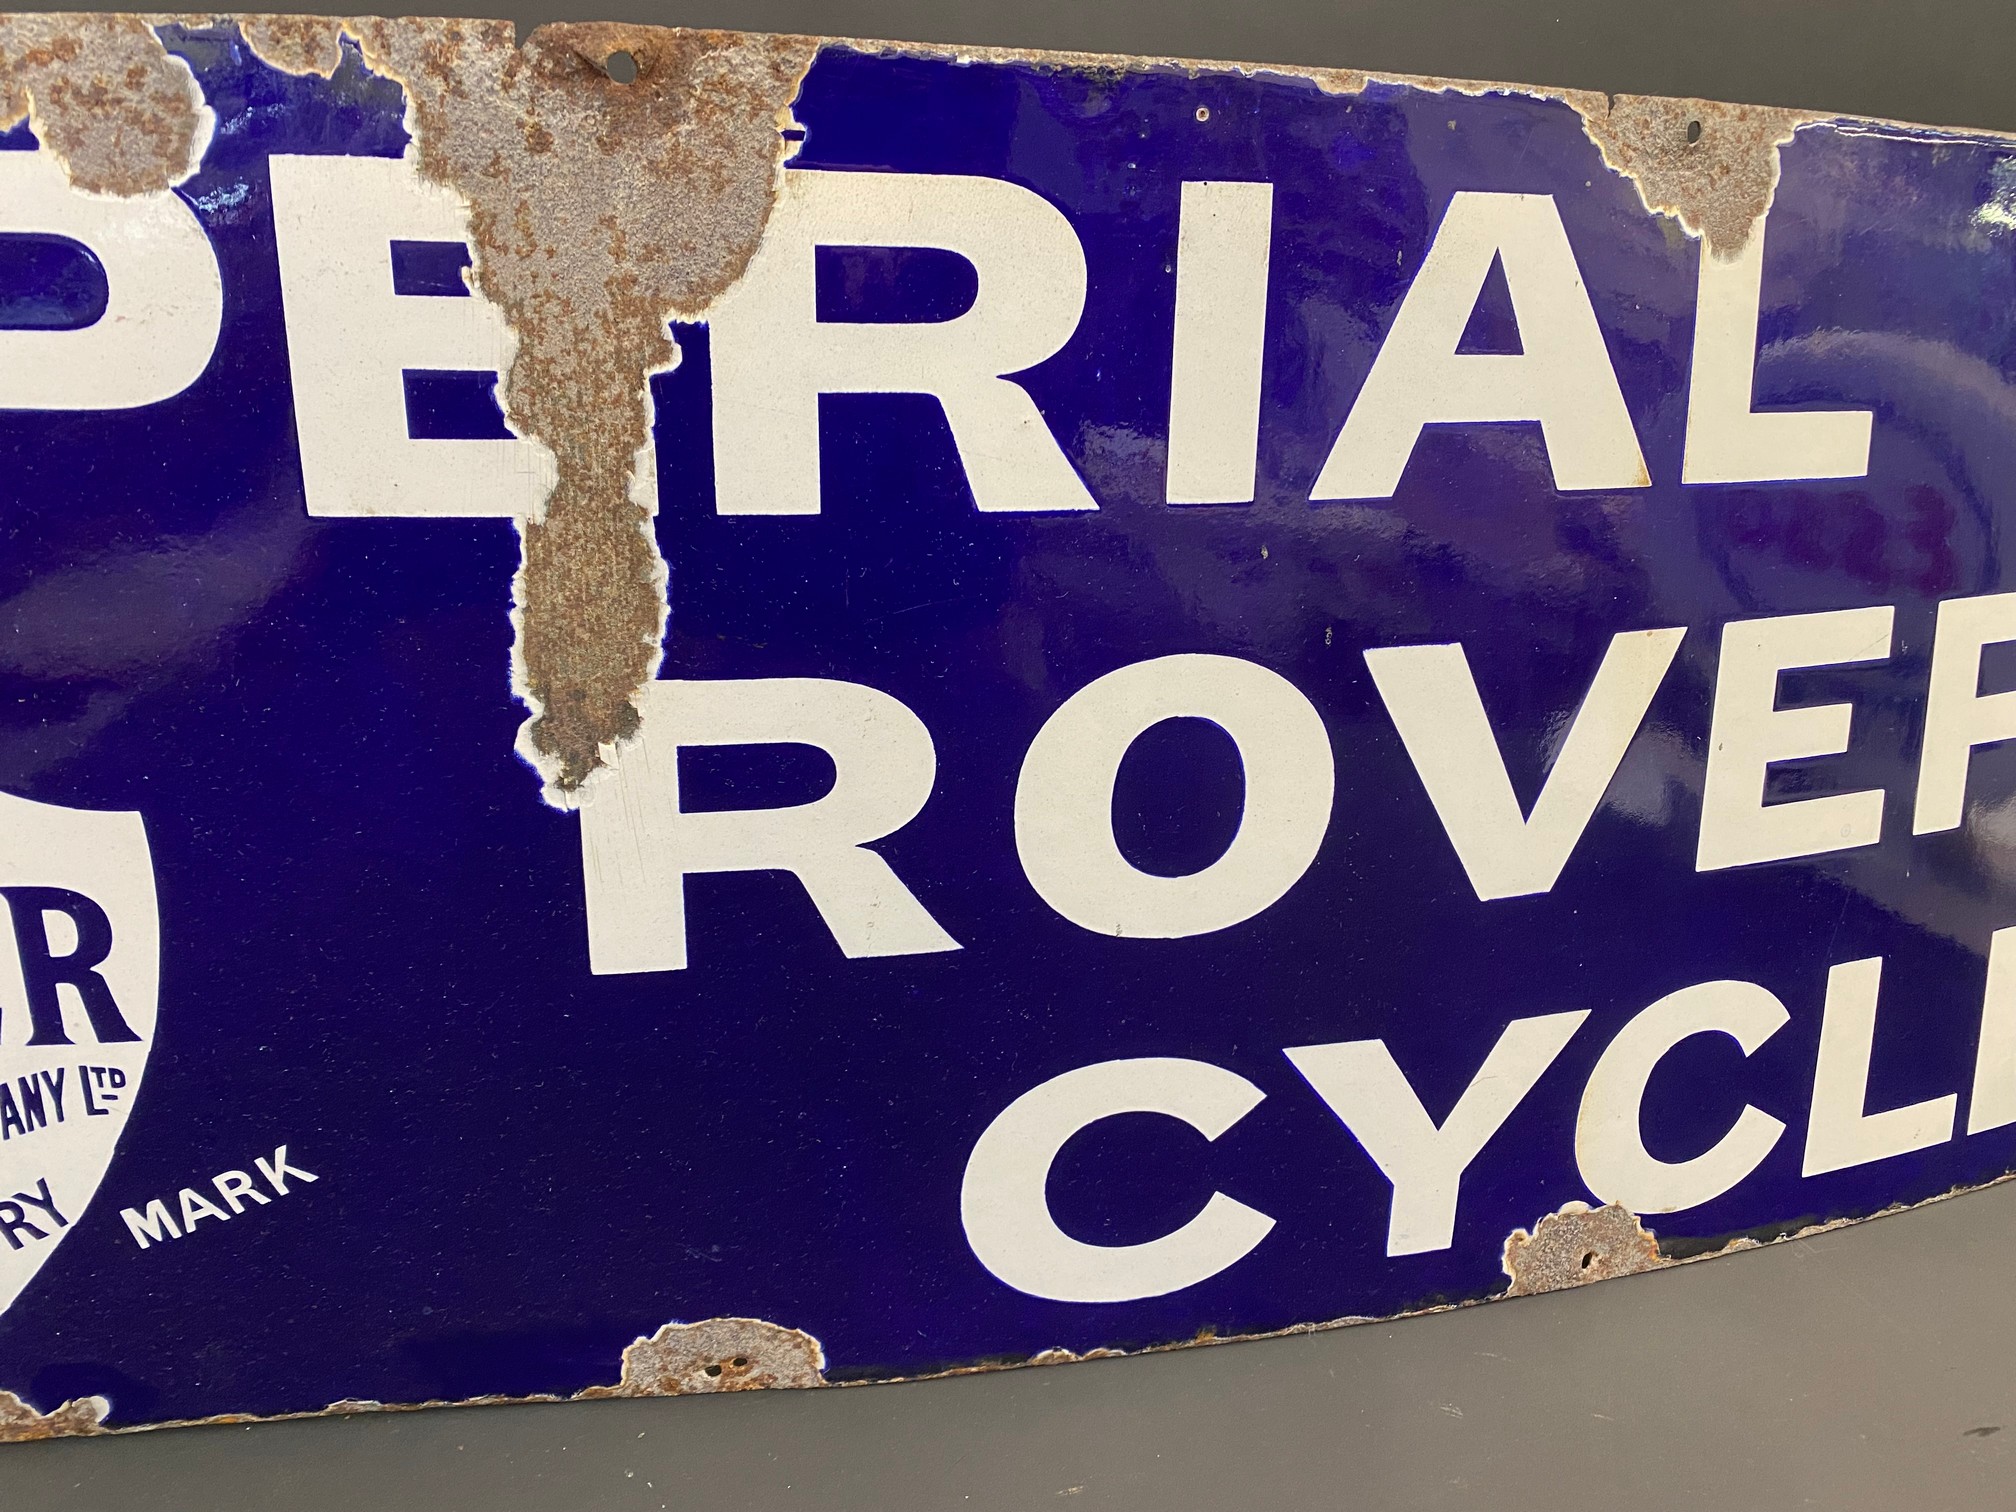 An Imperial Rover Cycles rectangular enamel sign, by Patent Enamel, dated January 1899, excellent - Image 3 of 5